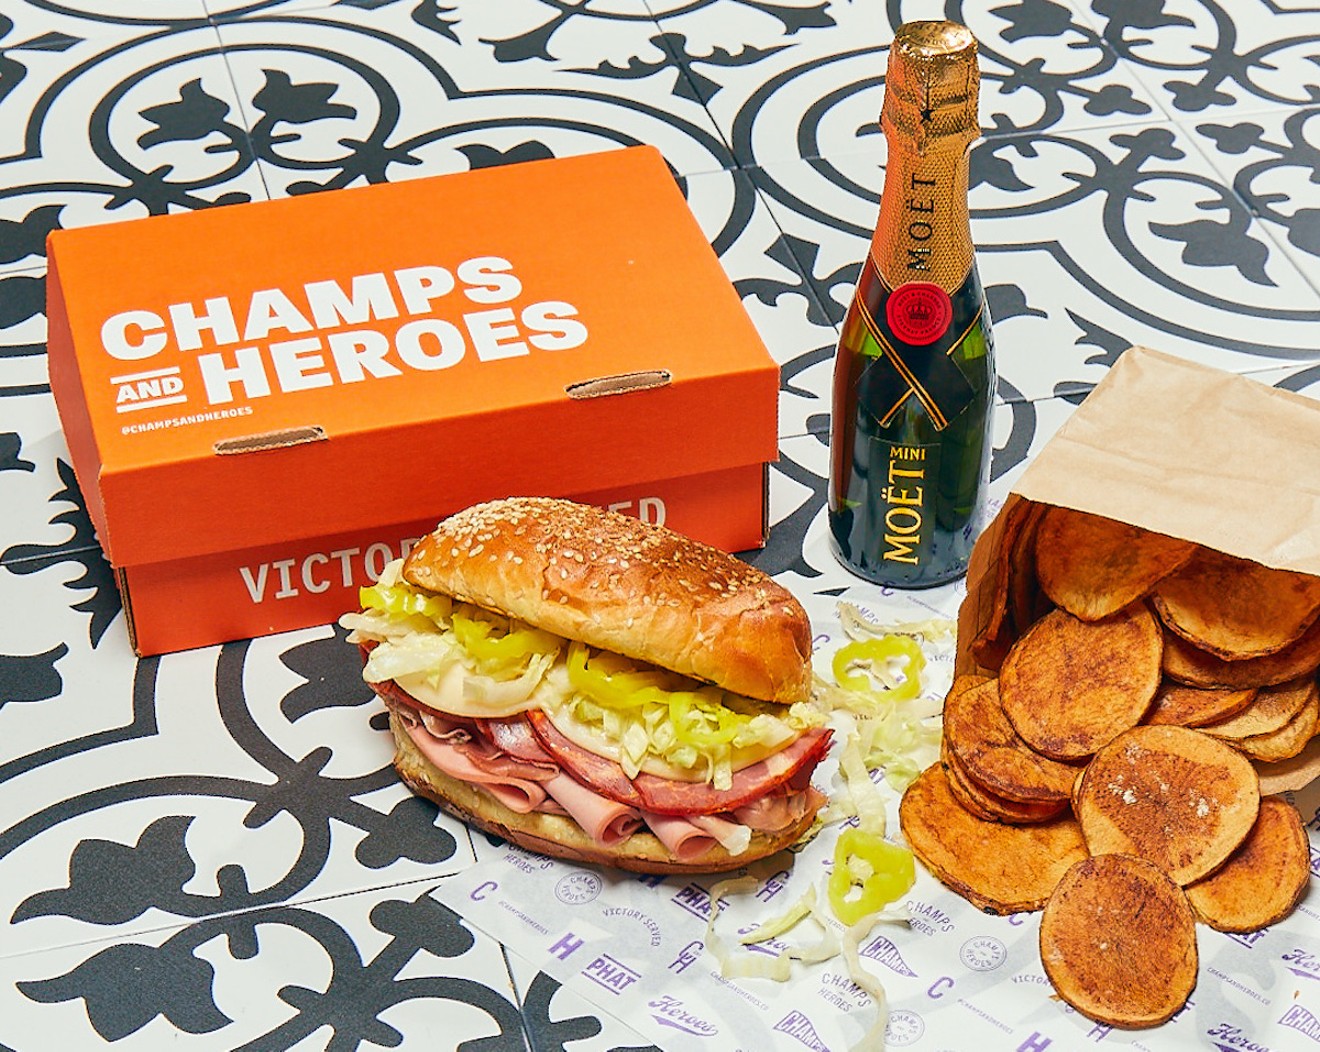 Champs and Heroes is a new delivery-only concept that pairs sandwiches with Champagne.